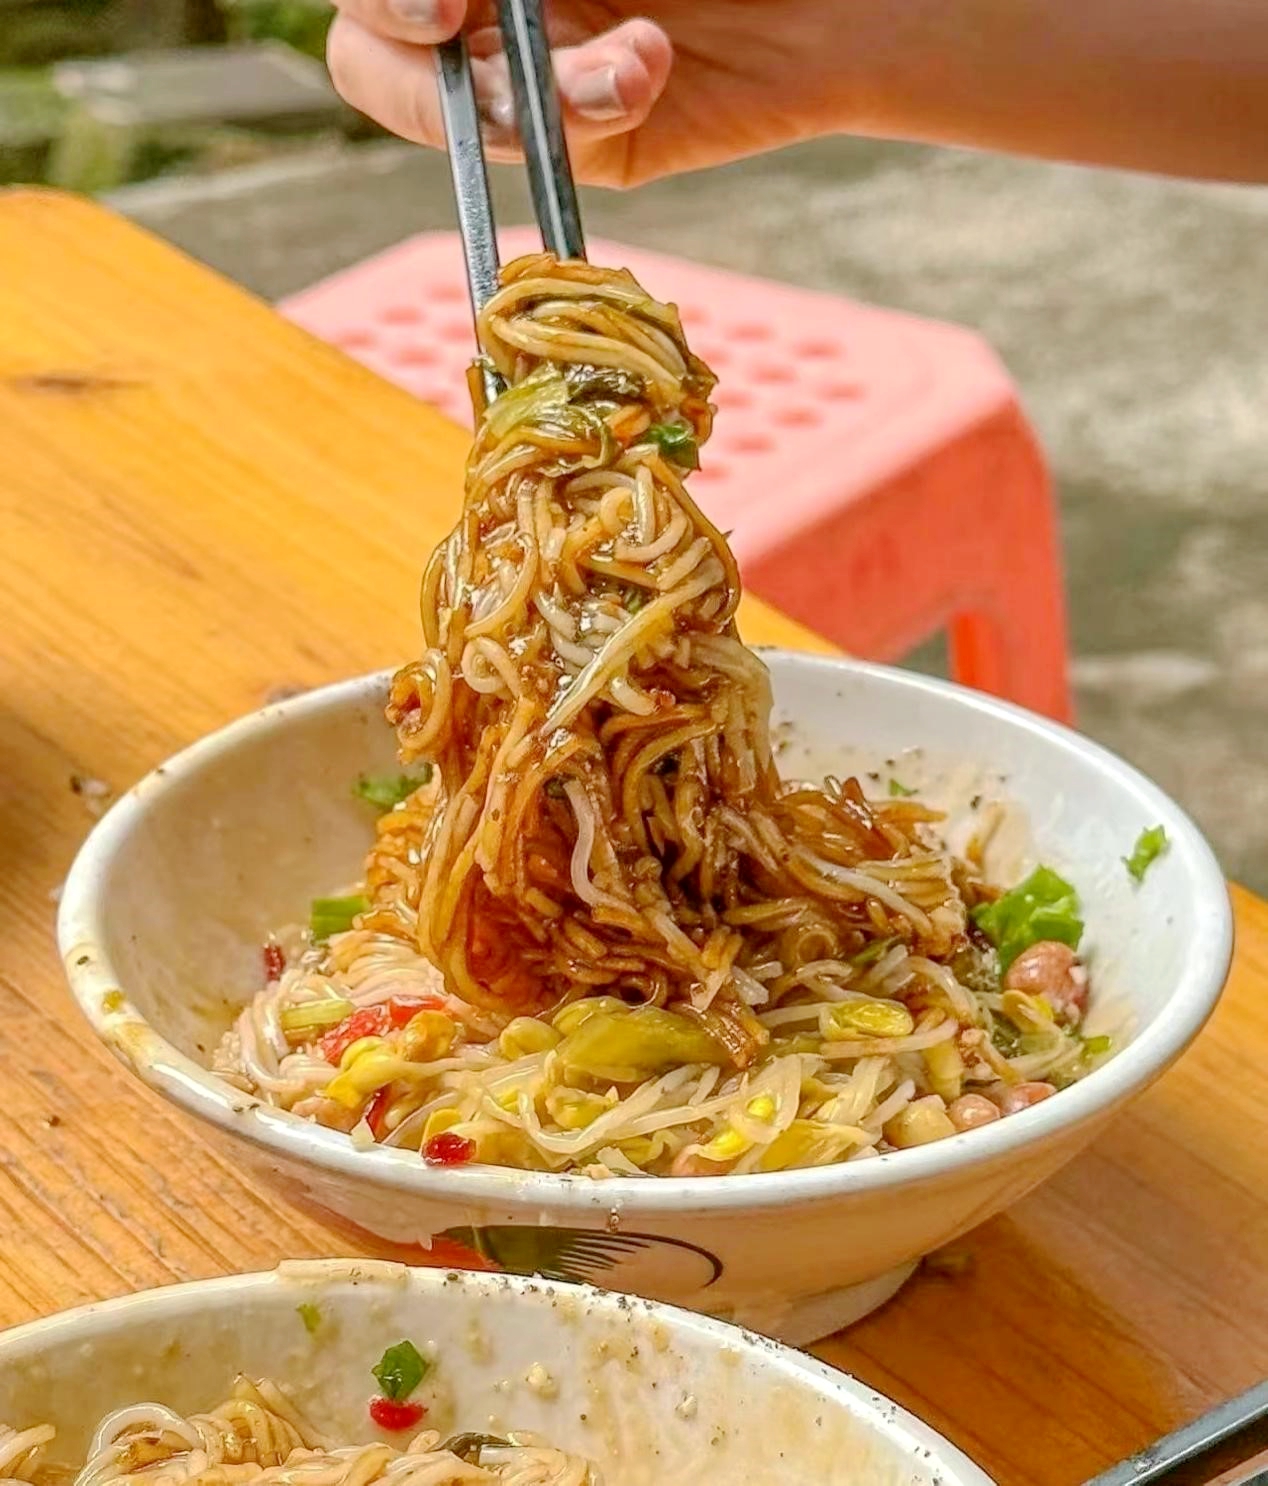 Hainan rice noodle is one of the most characteristic cuisines of Hainan Province. /CGTN